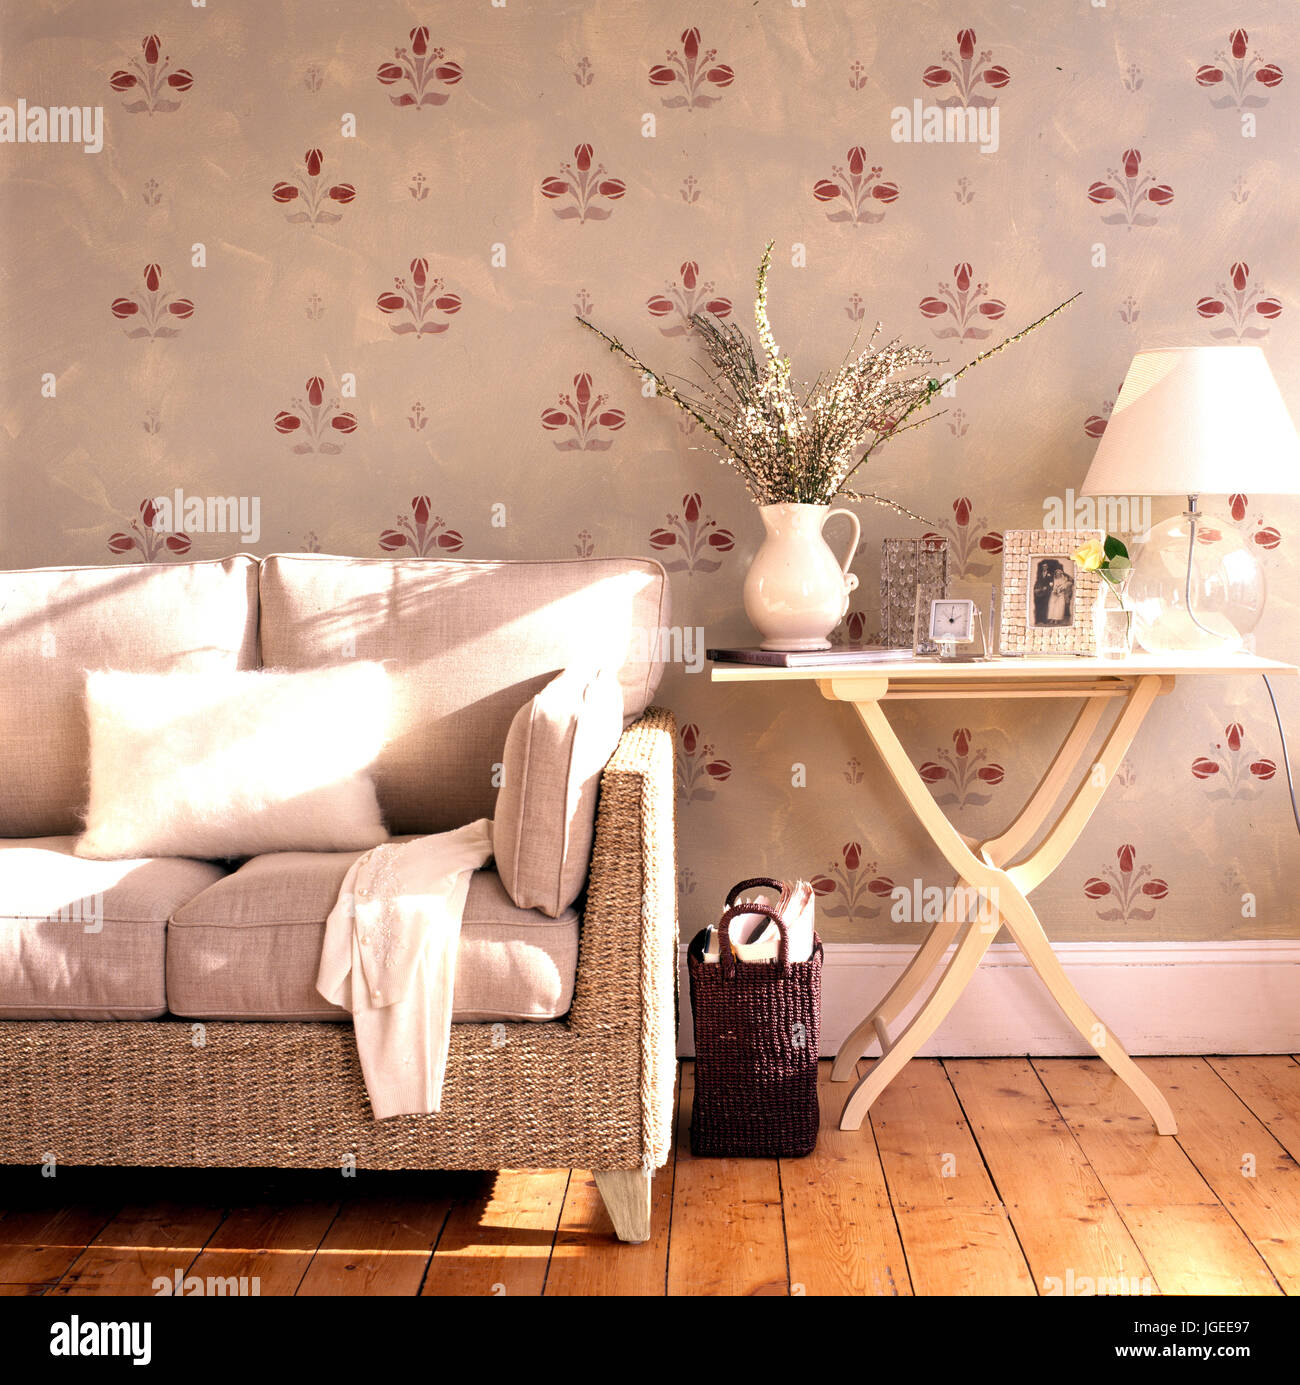 Stenciled wall and rattan sofa in living room with neutral colour scheme Stock Photo